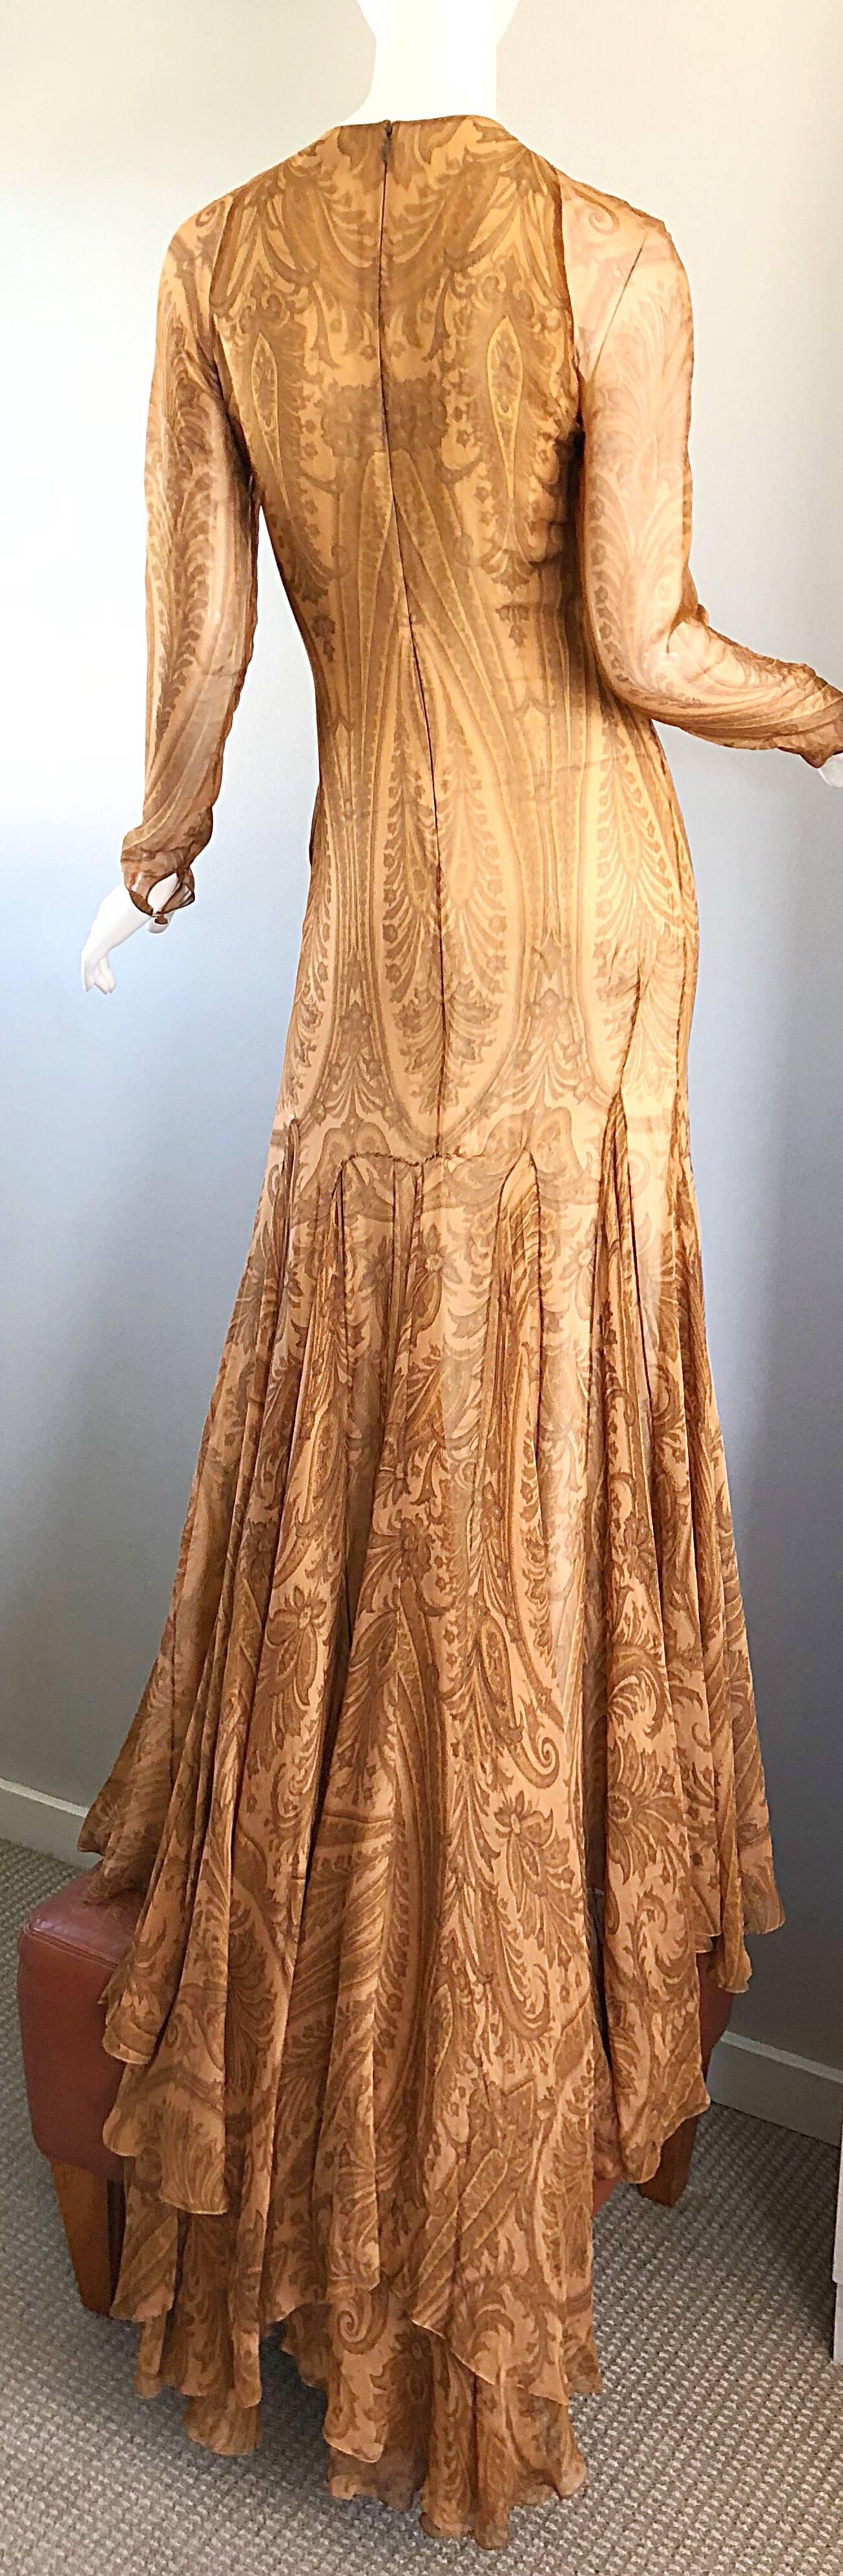 Sensational 1990s Bill Blass Couture Nude Silk Chiffon Paisley Vintage 90s Gown  For Sale 5